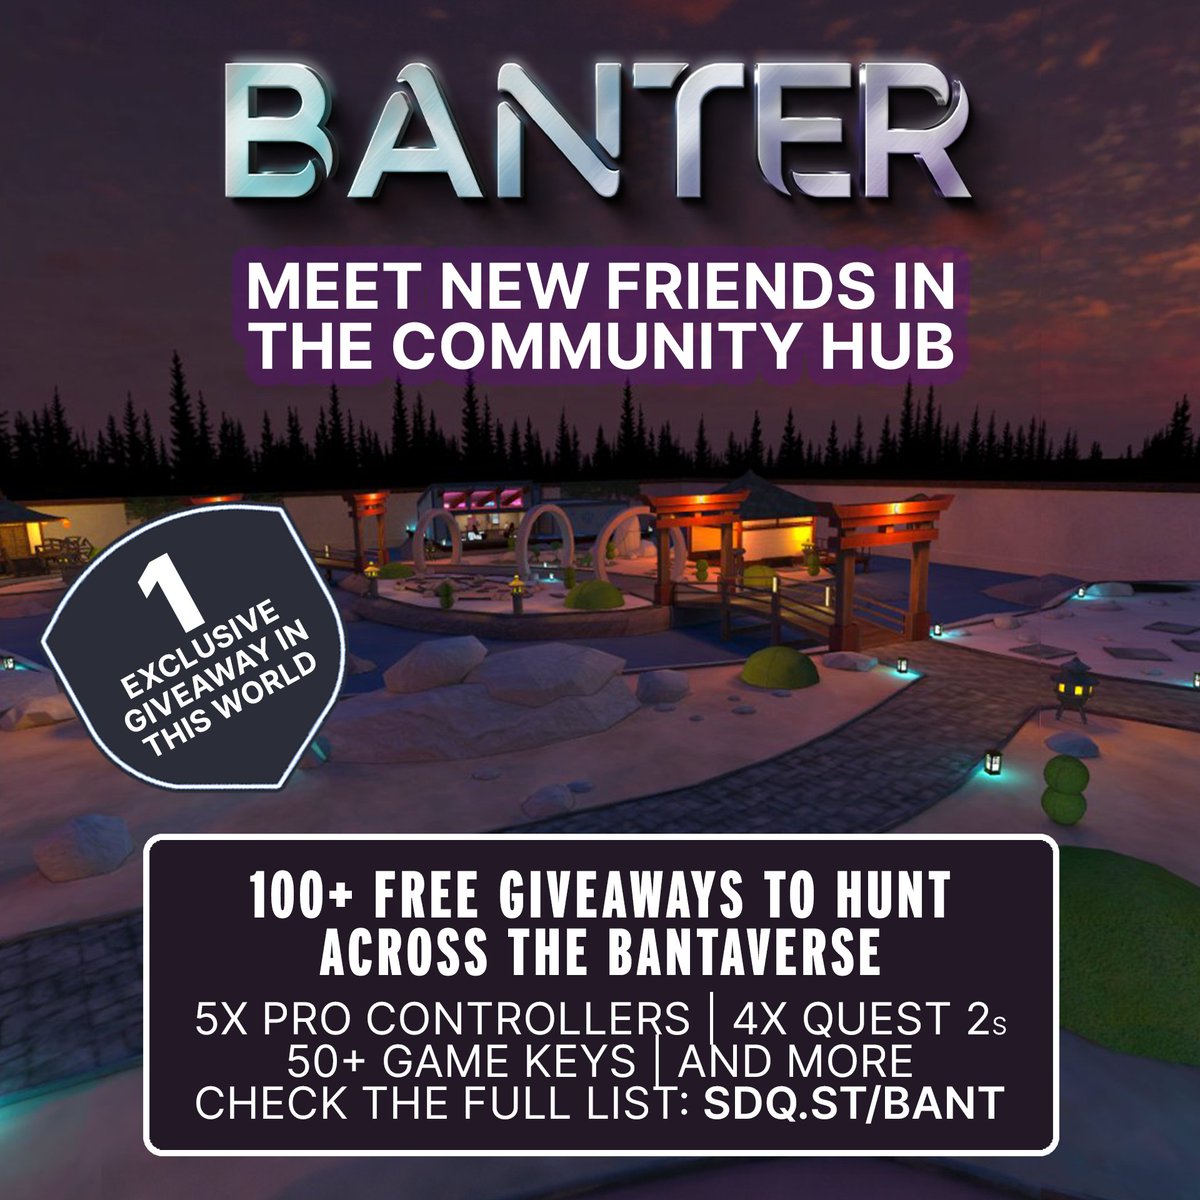 Attention Banter VR explorers!  ✨ Time to jump into the SQ Community Hub and discover the FREE giveaway in this social hub  🤼

Don't miss out on the 100+ giveaways happening throughout our app!  Let's find those [CLICK ME]'s 🌟

#BanterVR #SideQuest #FreeGiveaways